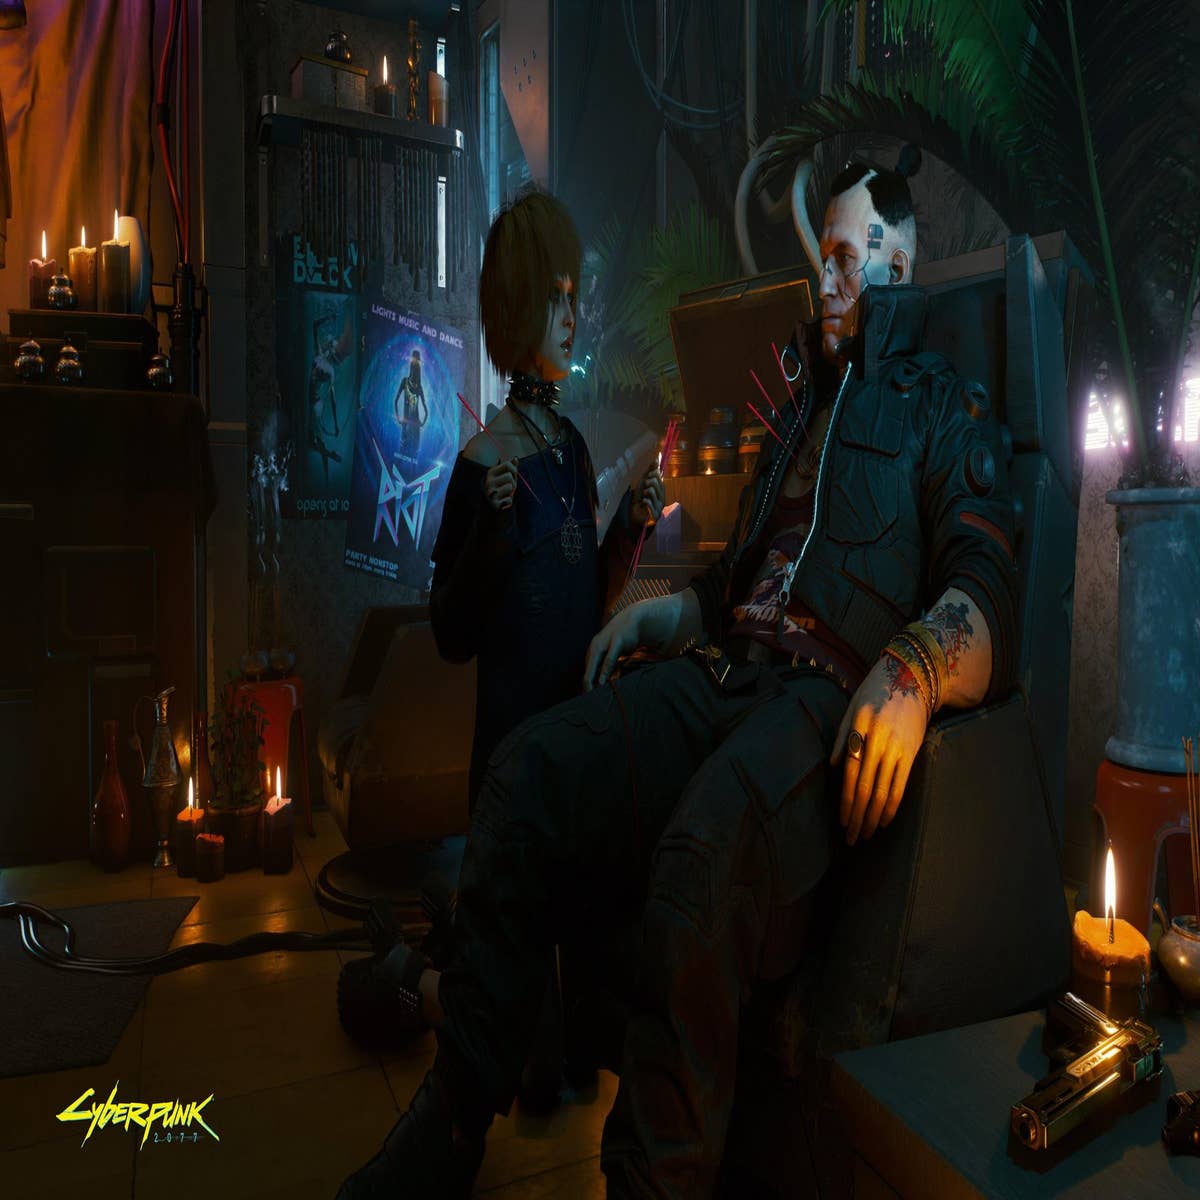 Cyberpunk 2077 PS5 Cover Art Possibly Revealed